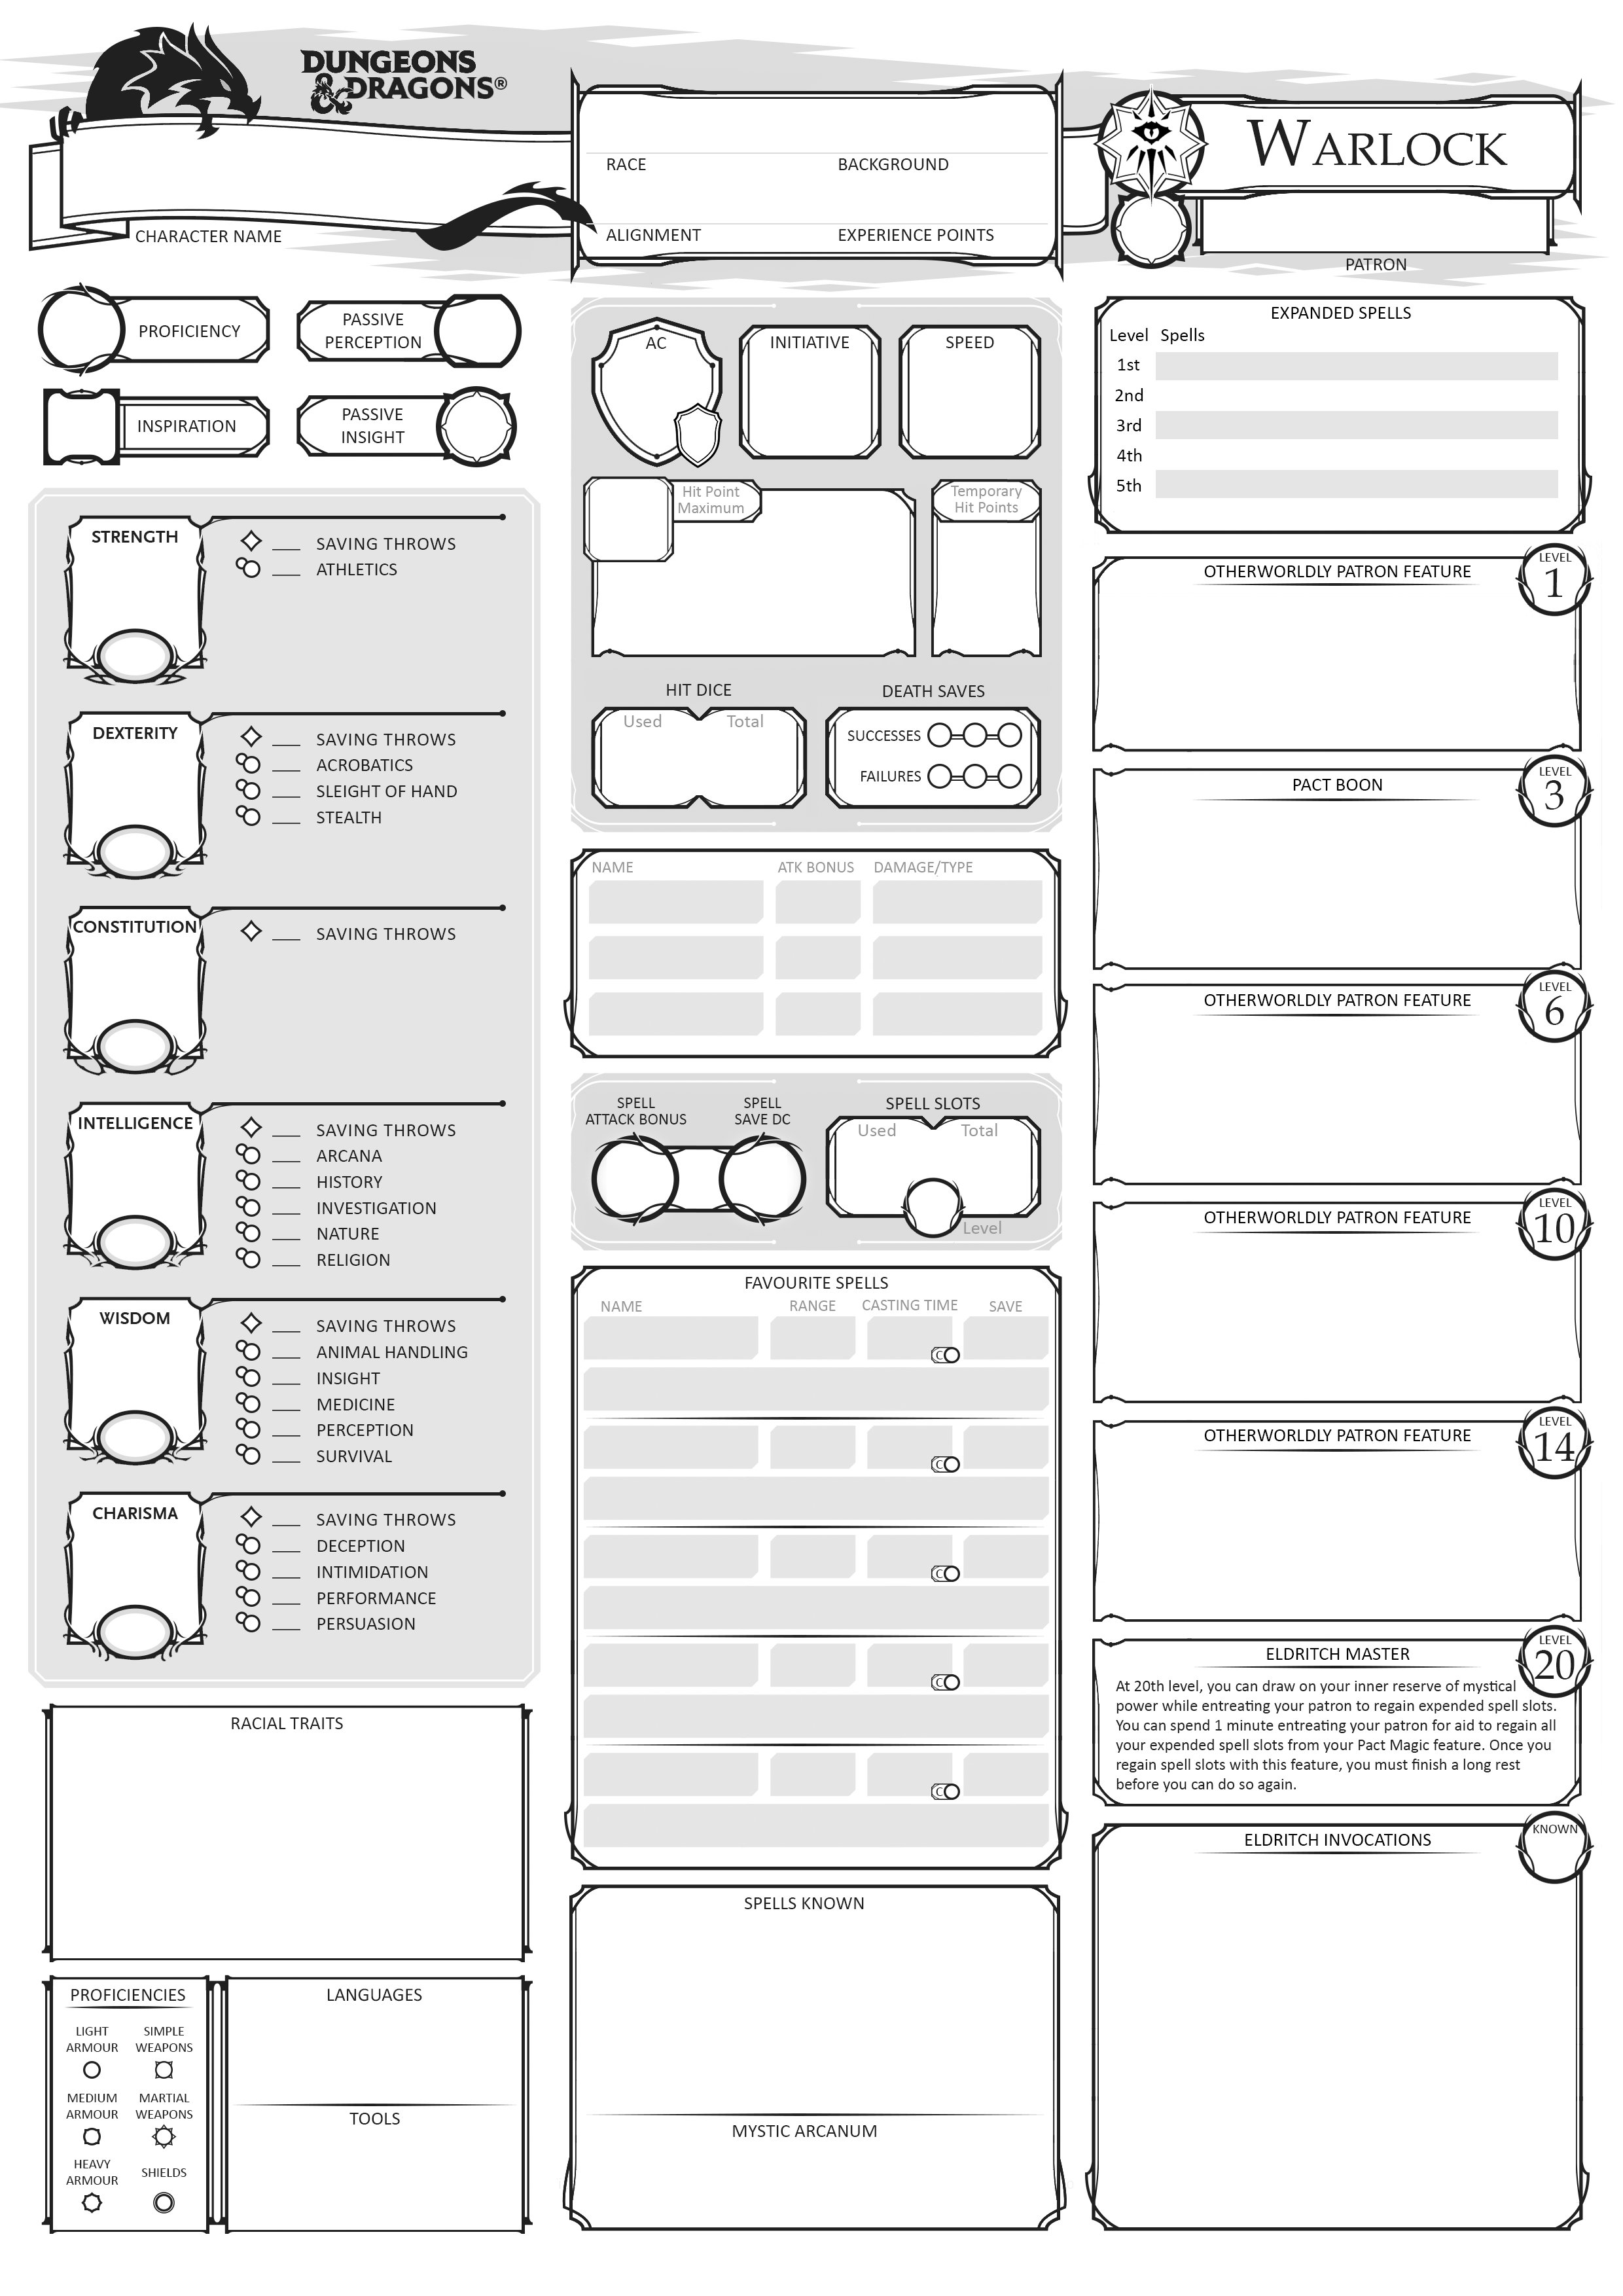 dnd-5e-character-sheet-form-fillable-premade-printable-forms-free-online